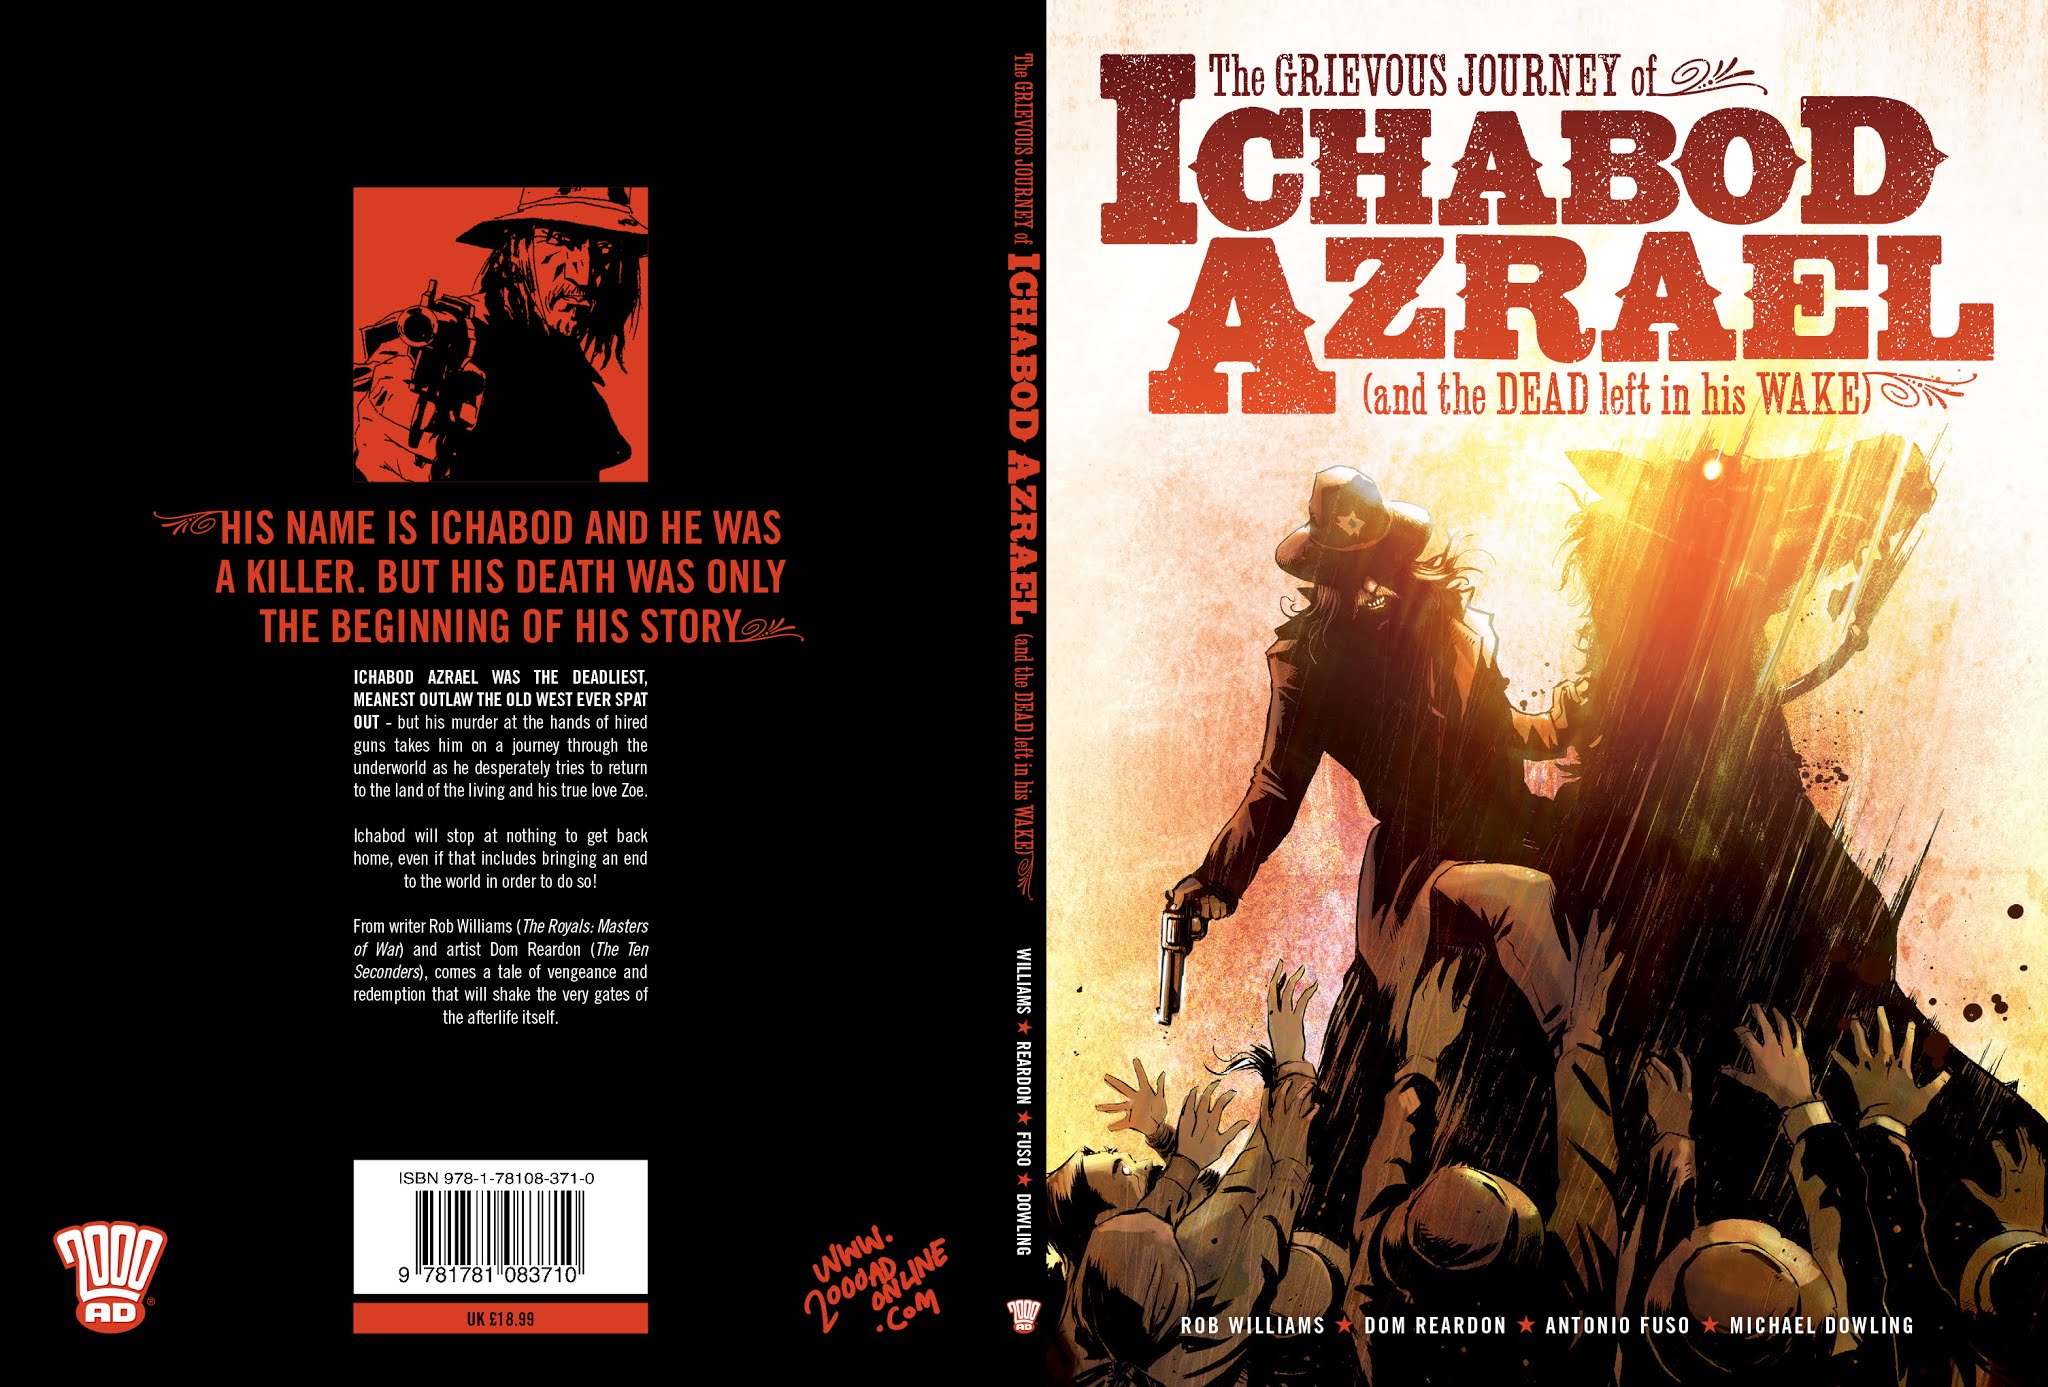 Read online The Grievous Journey of Ichabod Azrael (and the DEAD LEFT in His WAKE) comic -  Issue # TPB - 1